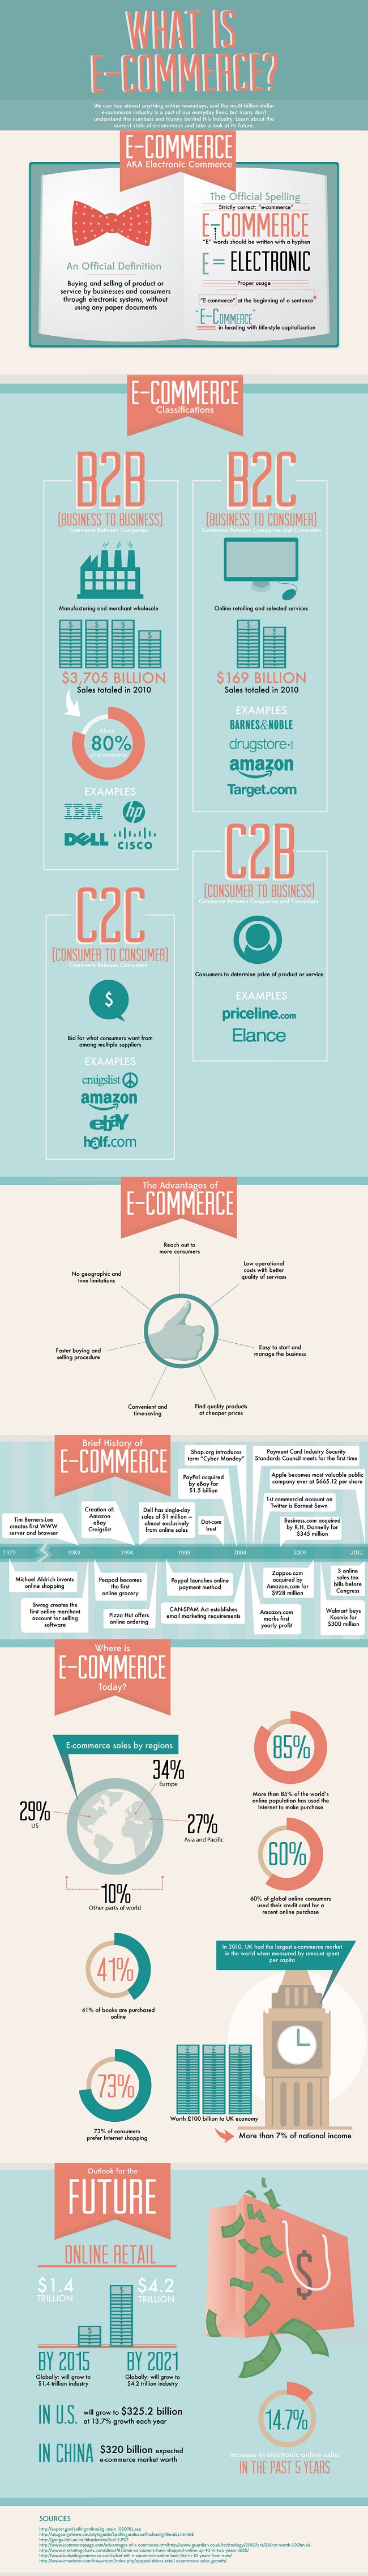 What-Is-eCommerce-Infographic